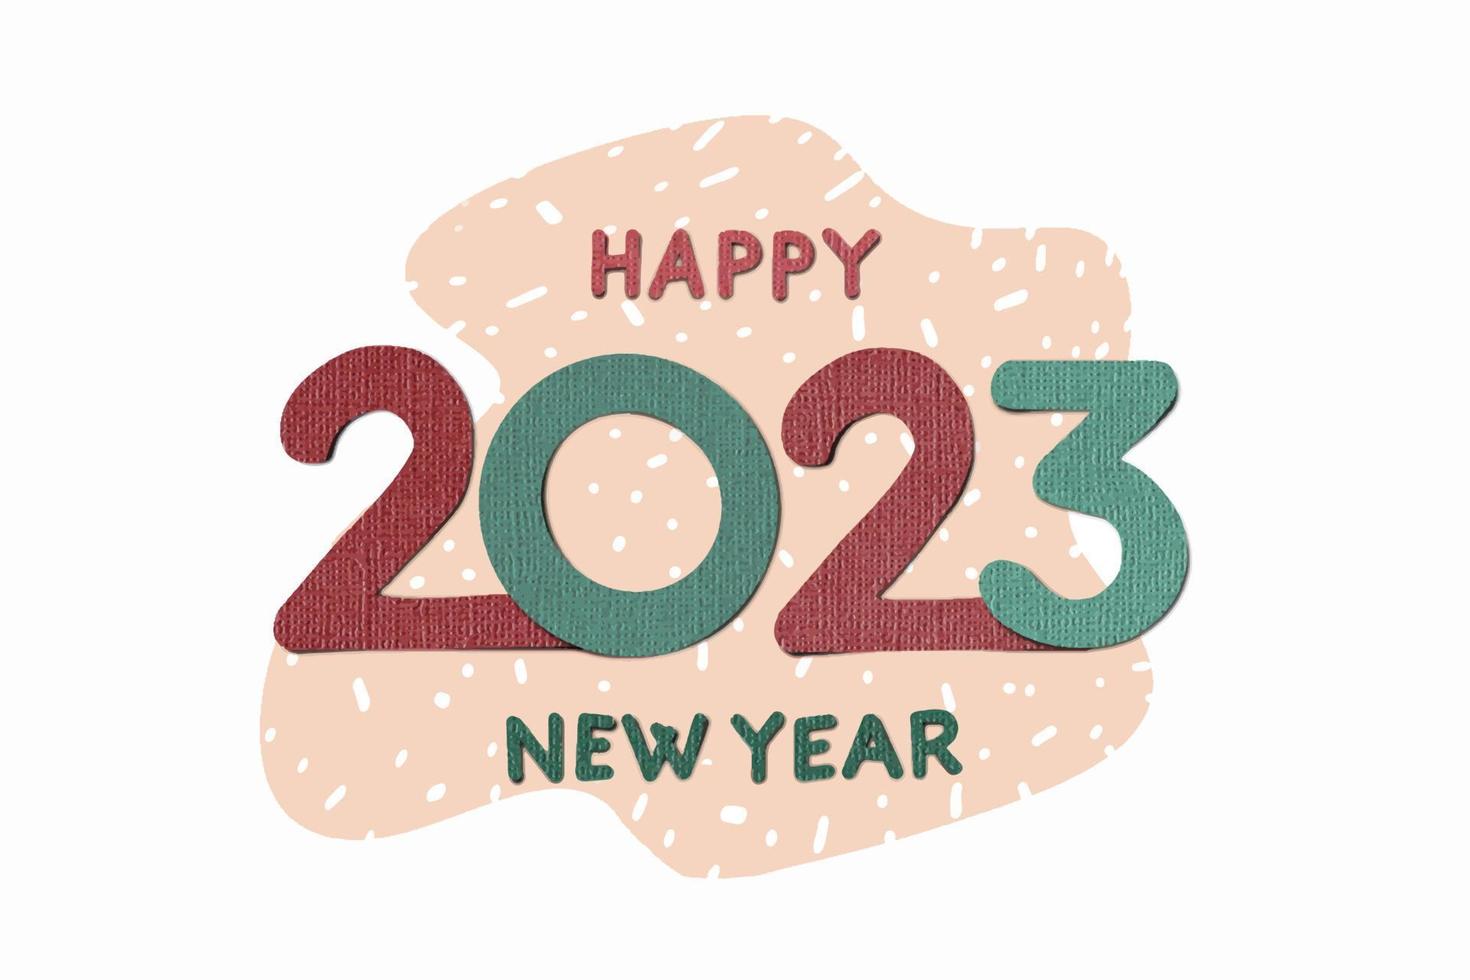 Paper cut style of Logo design 2023 Happy New Year trend text de vector